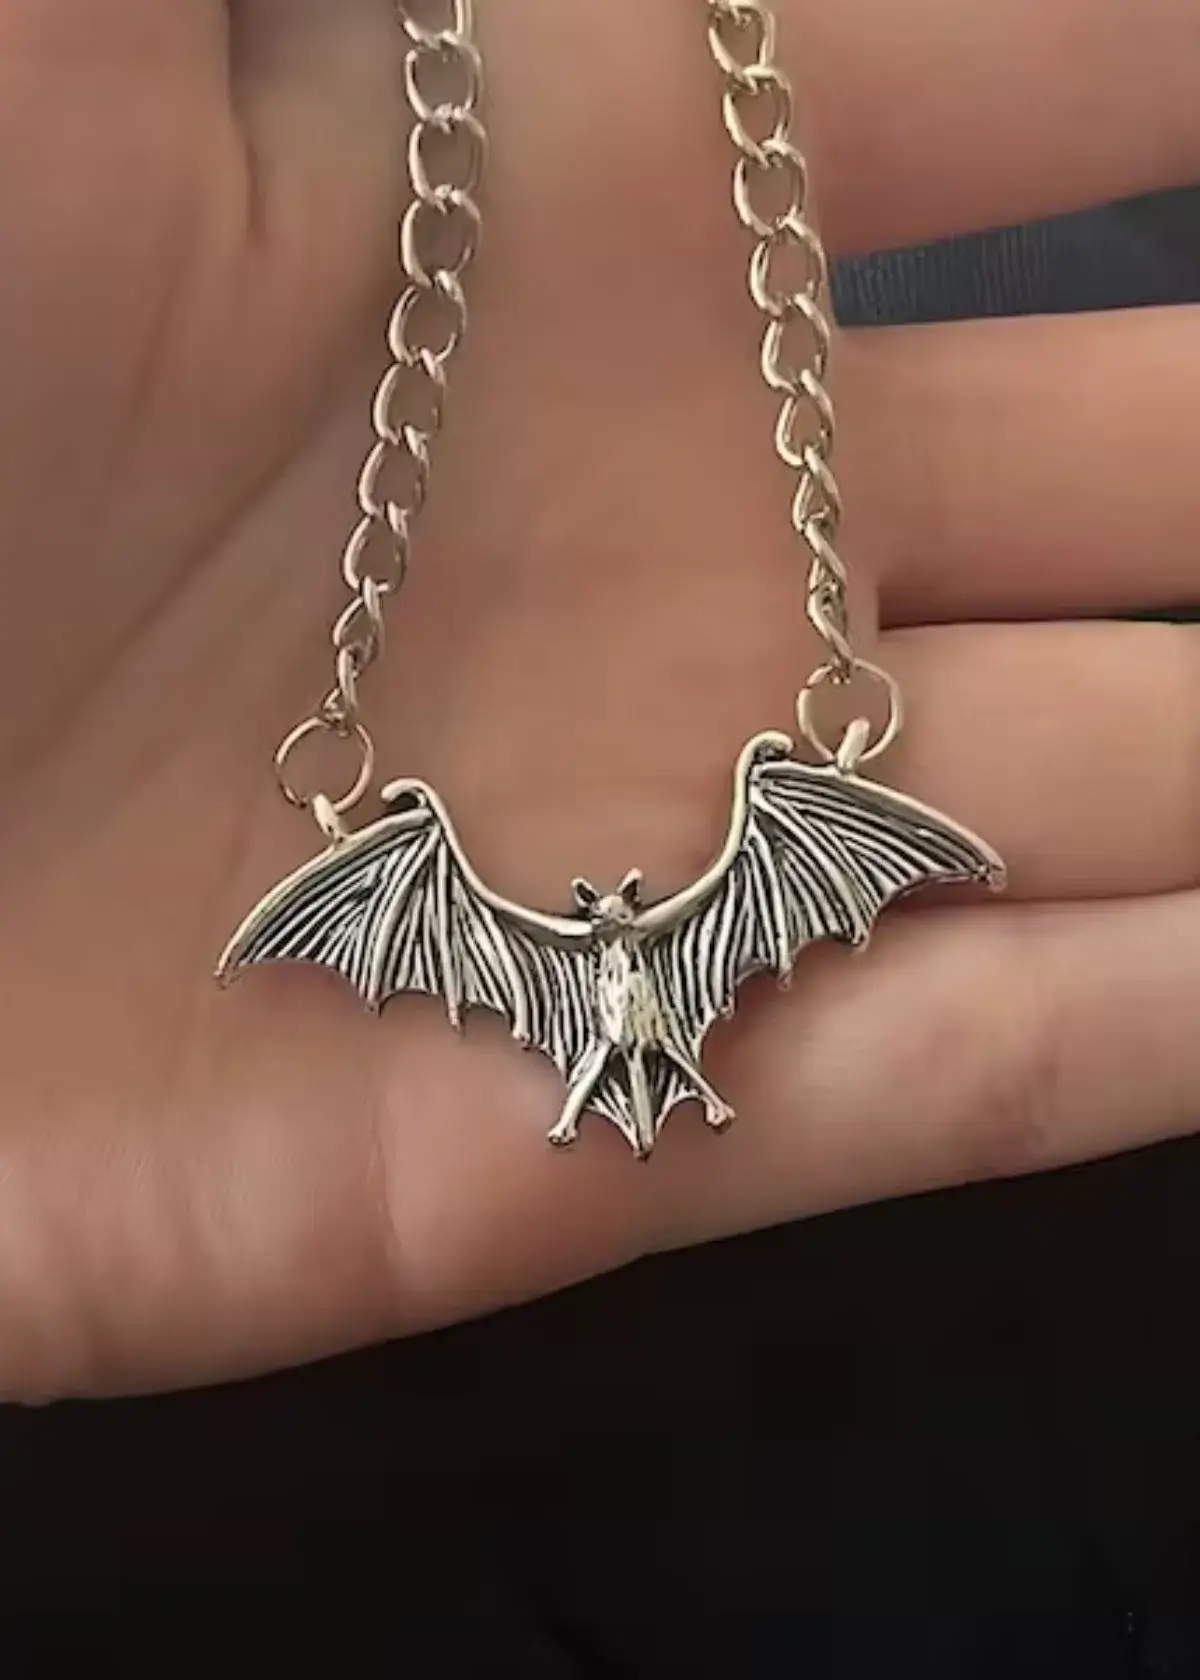 What materials are bat necklaces made of?